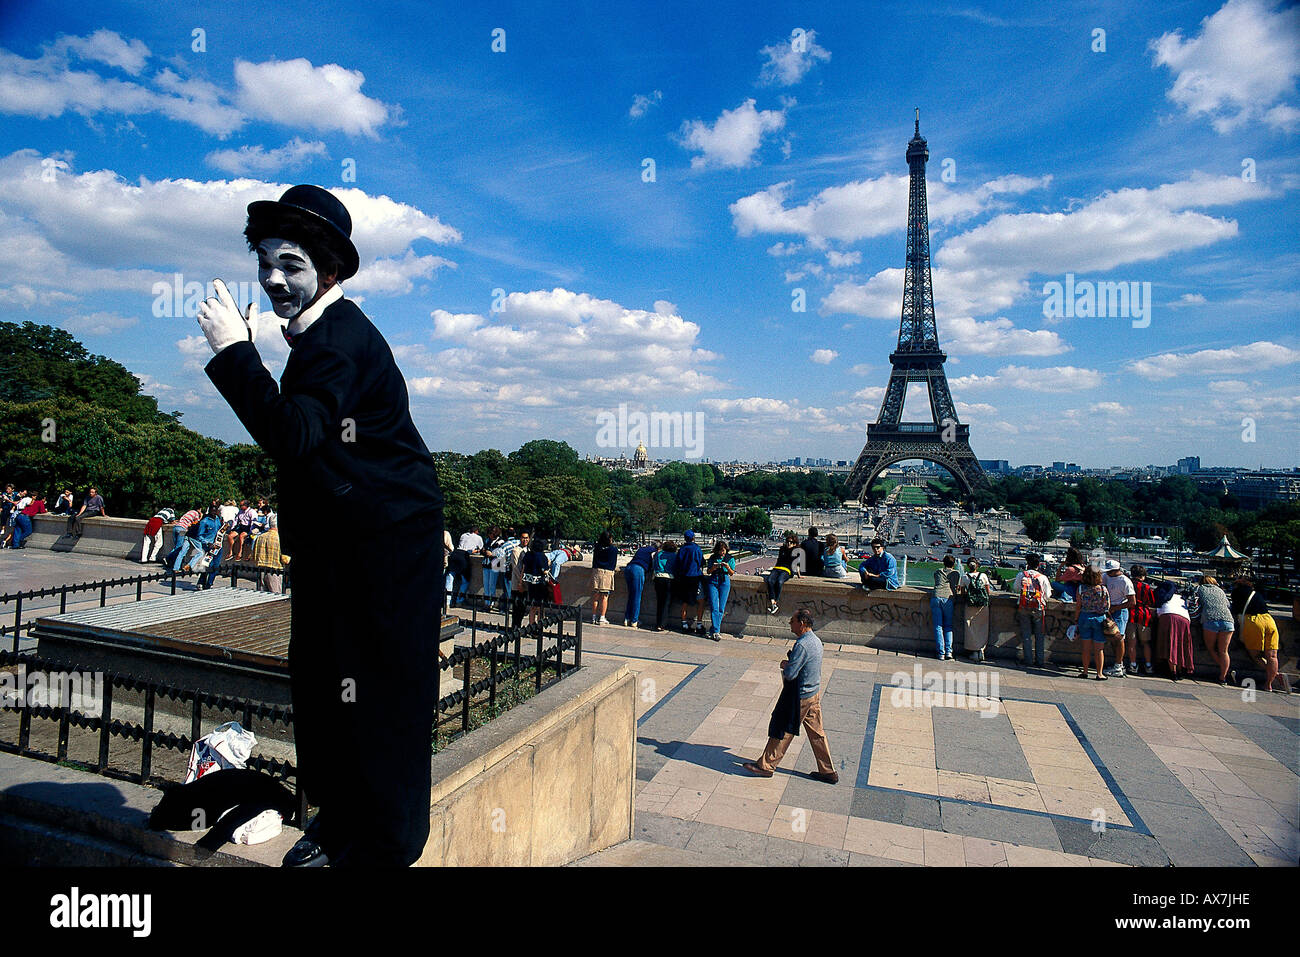 Clown at Trocadero in front of the Eiffel tower, Paris, France, Europe Stock Photo